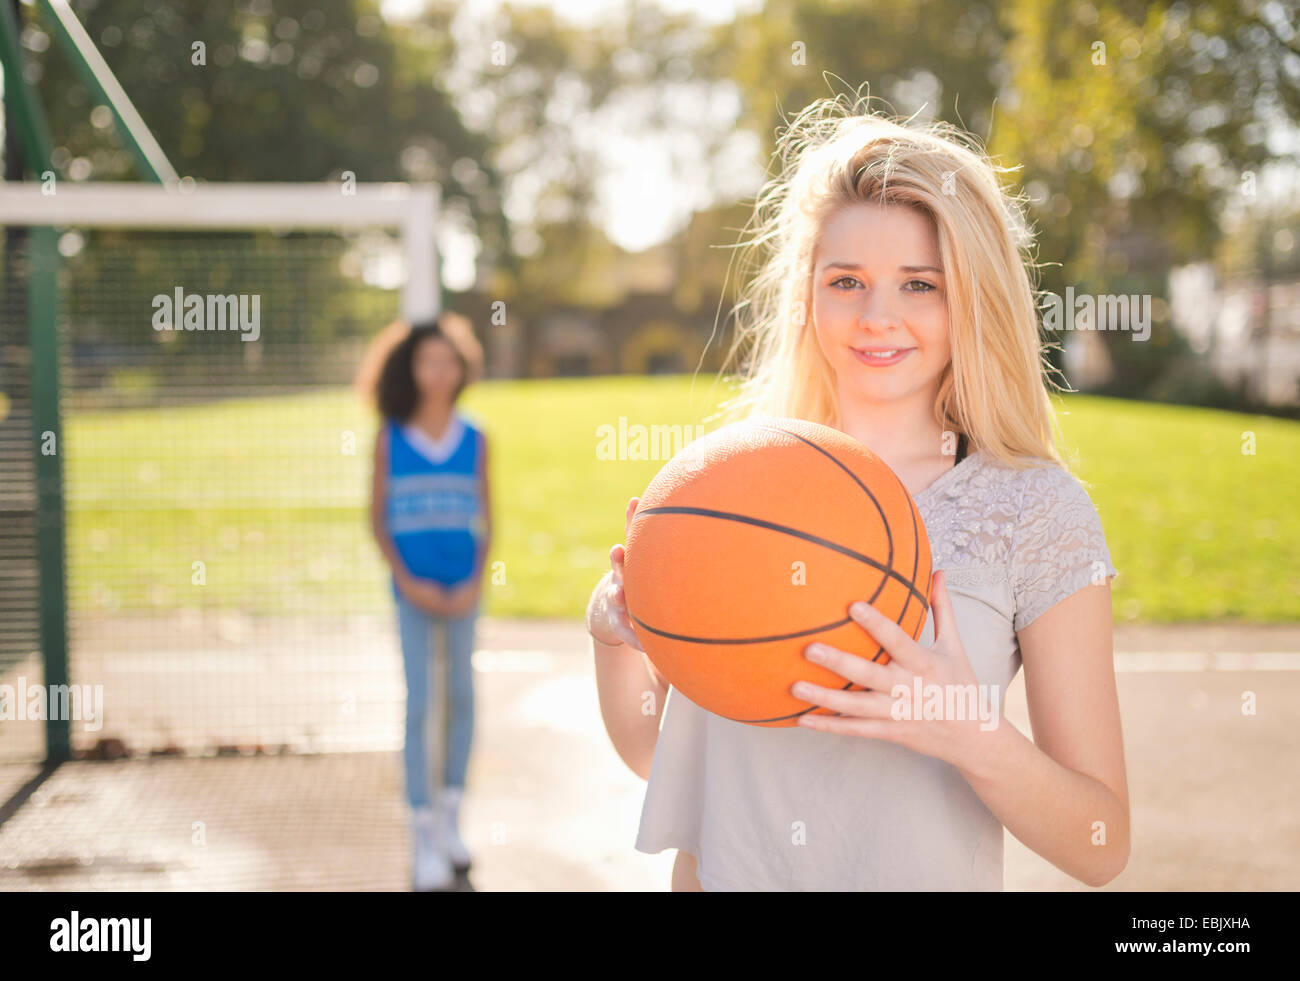 Portrait of young woman holding up basketball Stock Photo